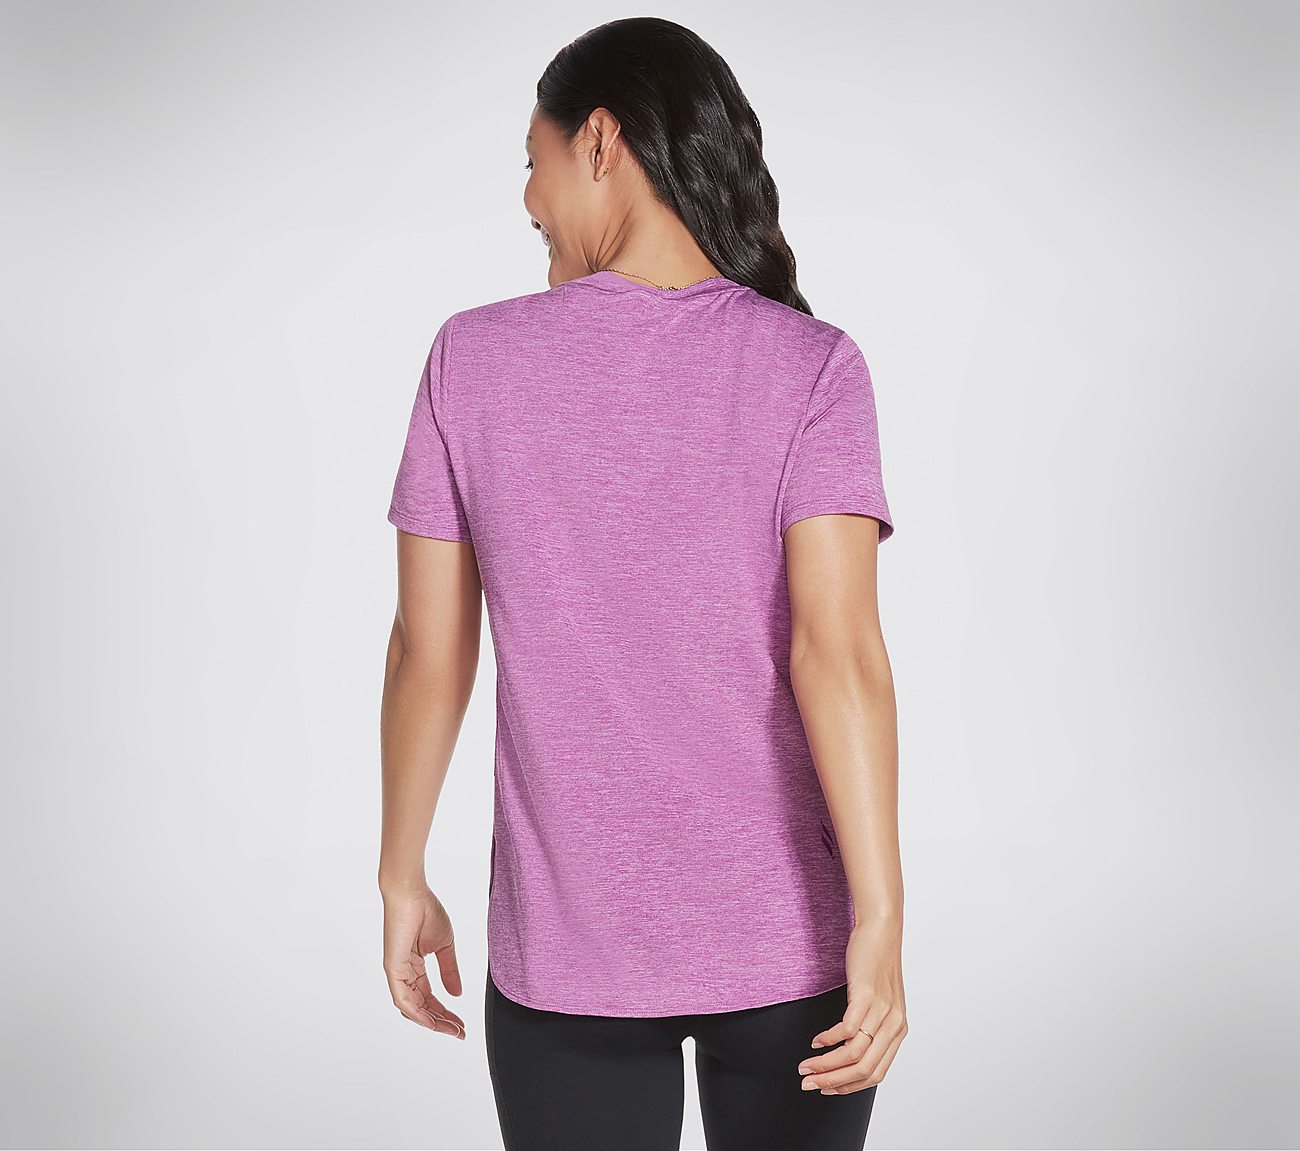 ON THE GO TUNIC, PURPLE/HOT PINK Apparels Top View